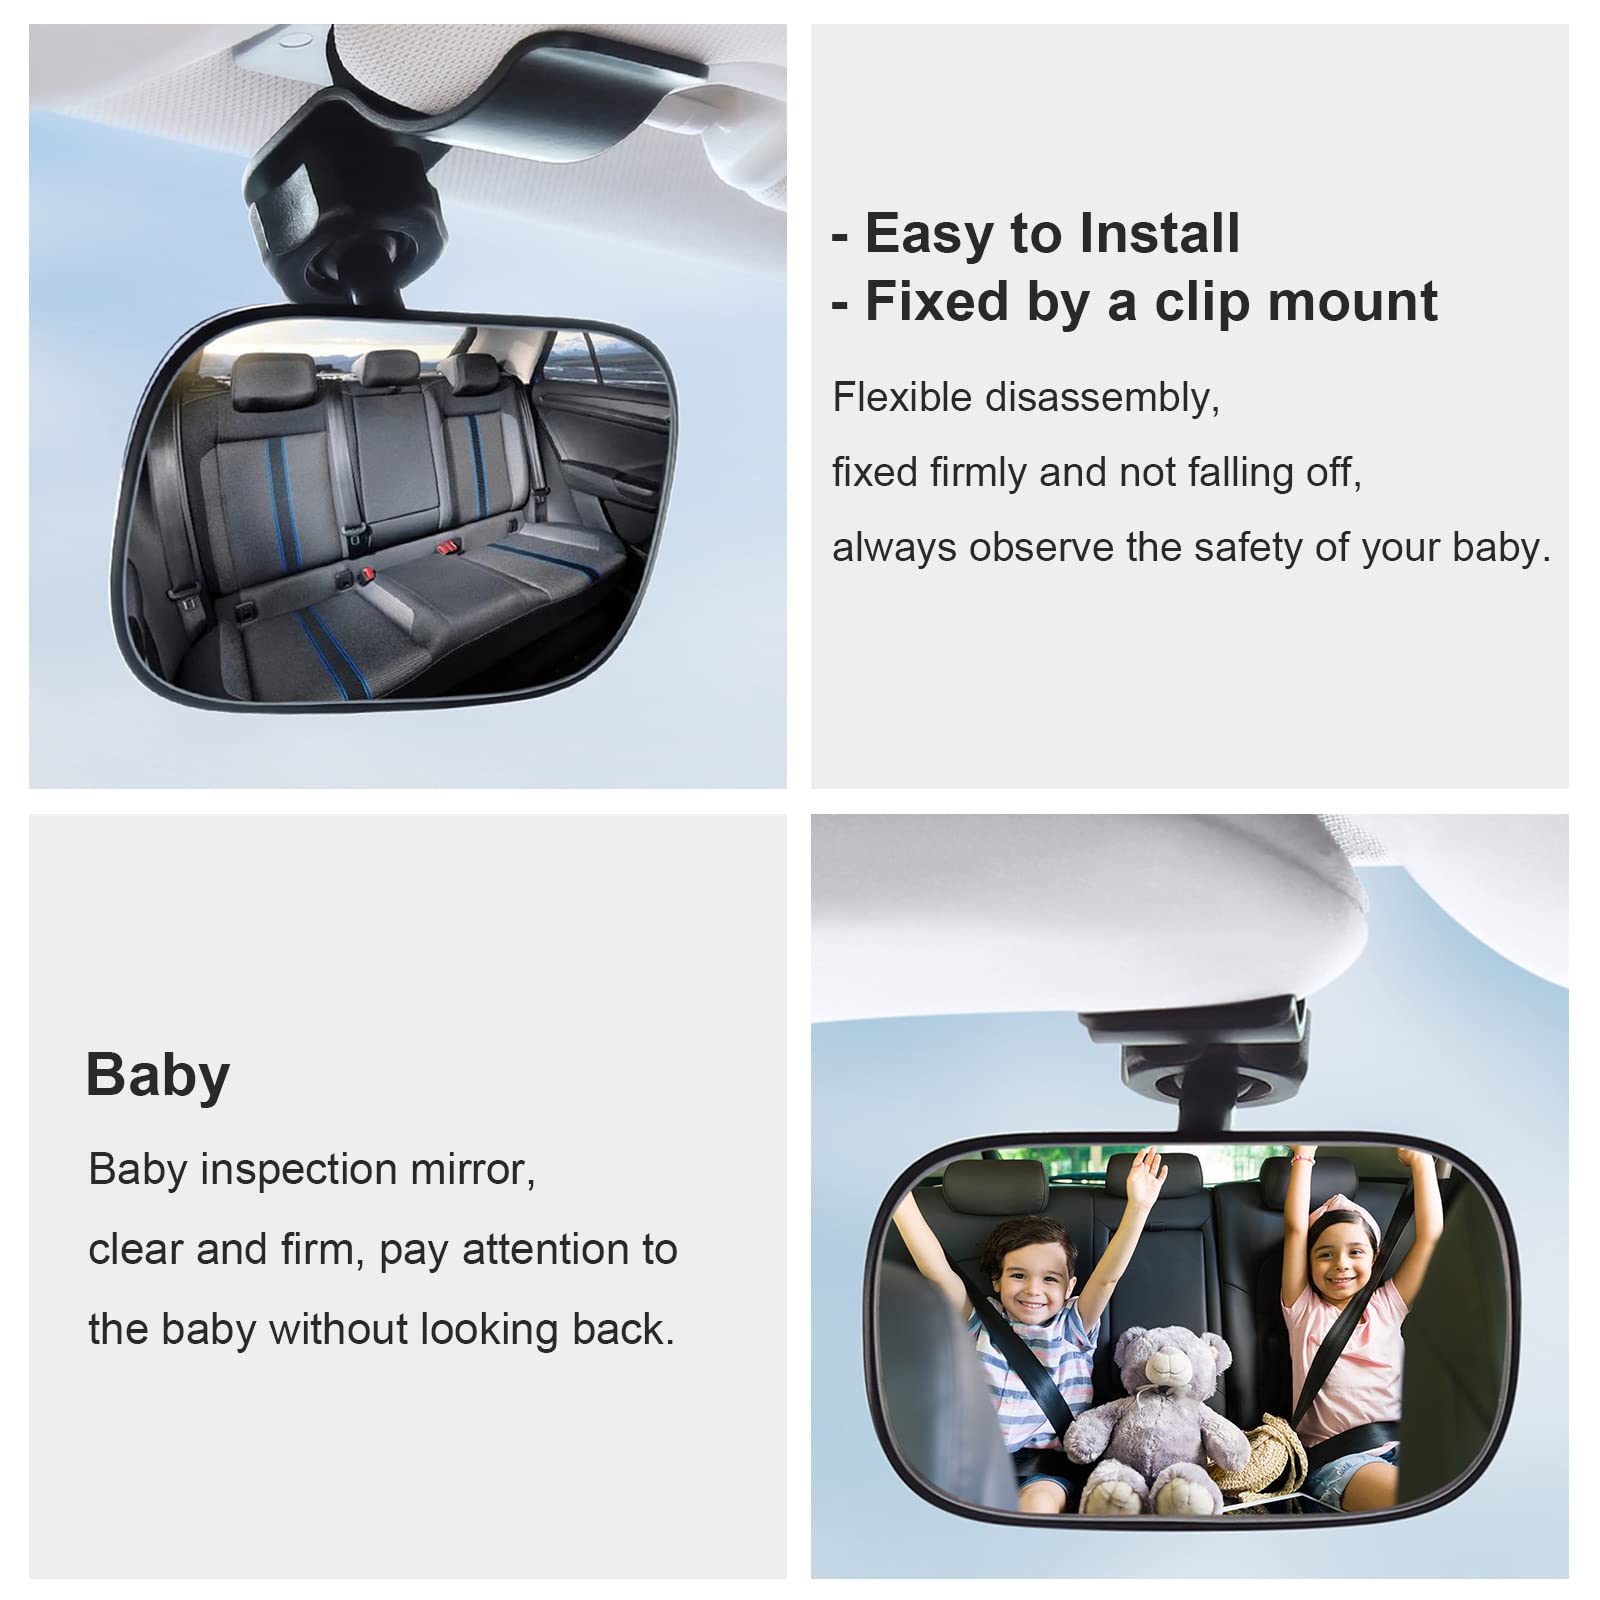 Car Mirror for Baby, Dannisly Back Seat Baby Mirror, Toddler Adjustable Facing Rear View Convex - Accessories, Clip on Windshield or Sun Visor, Black 2